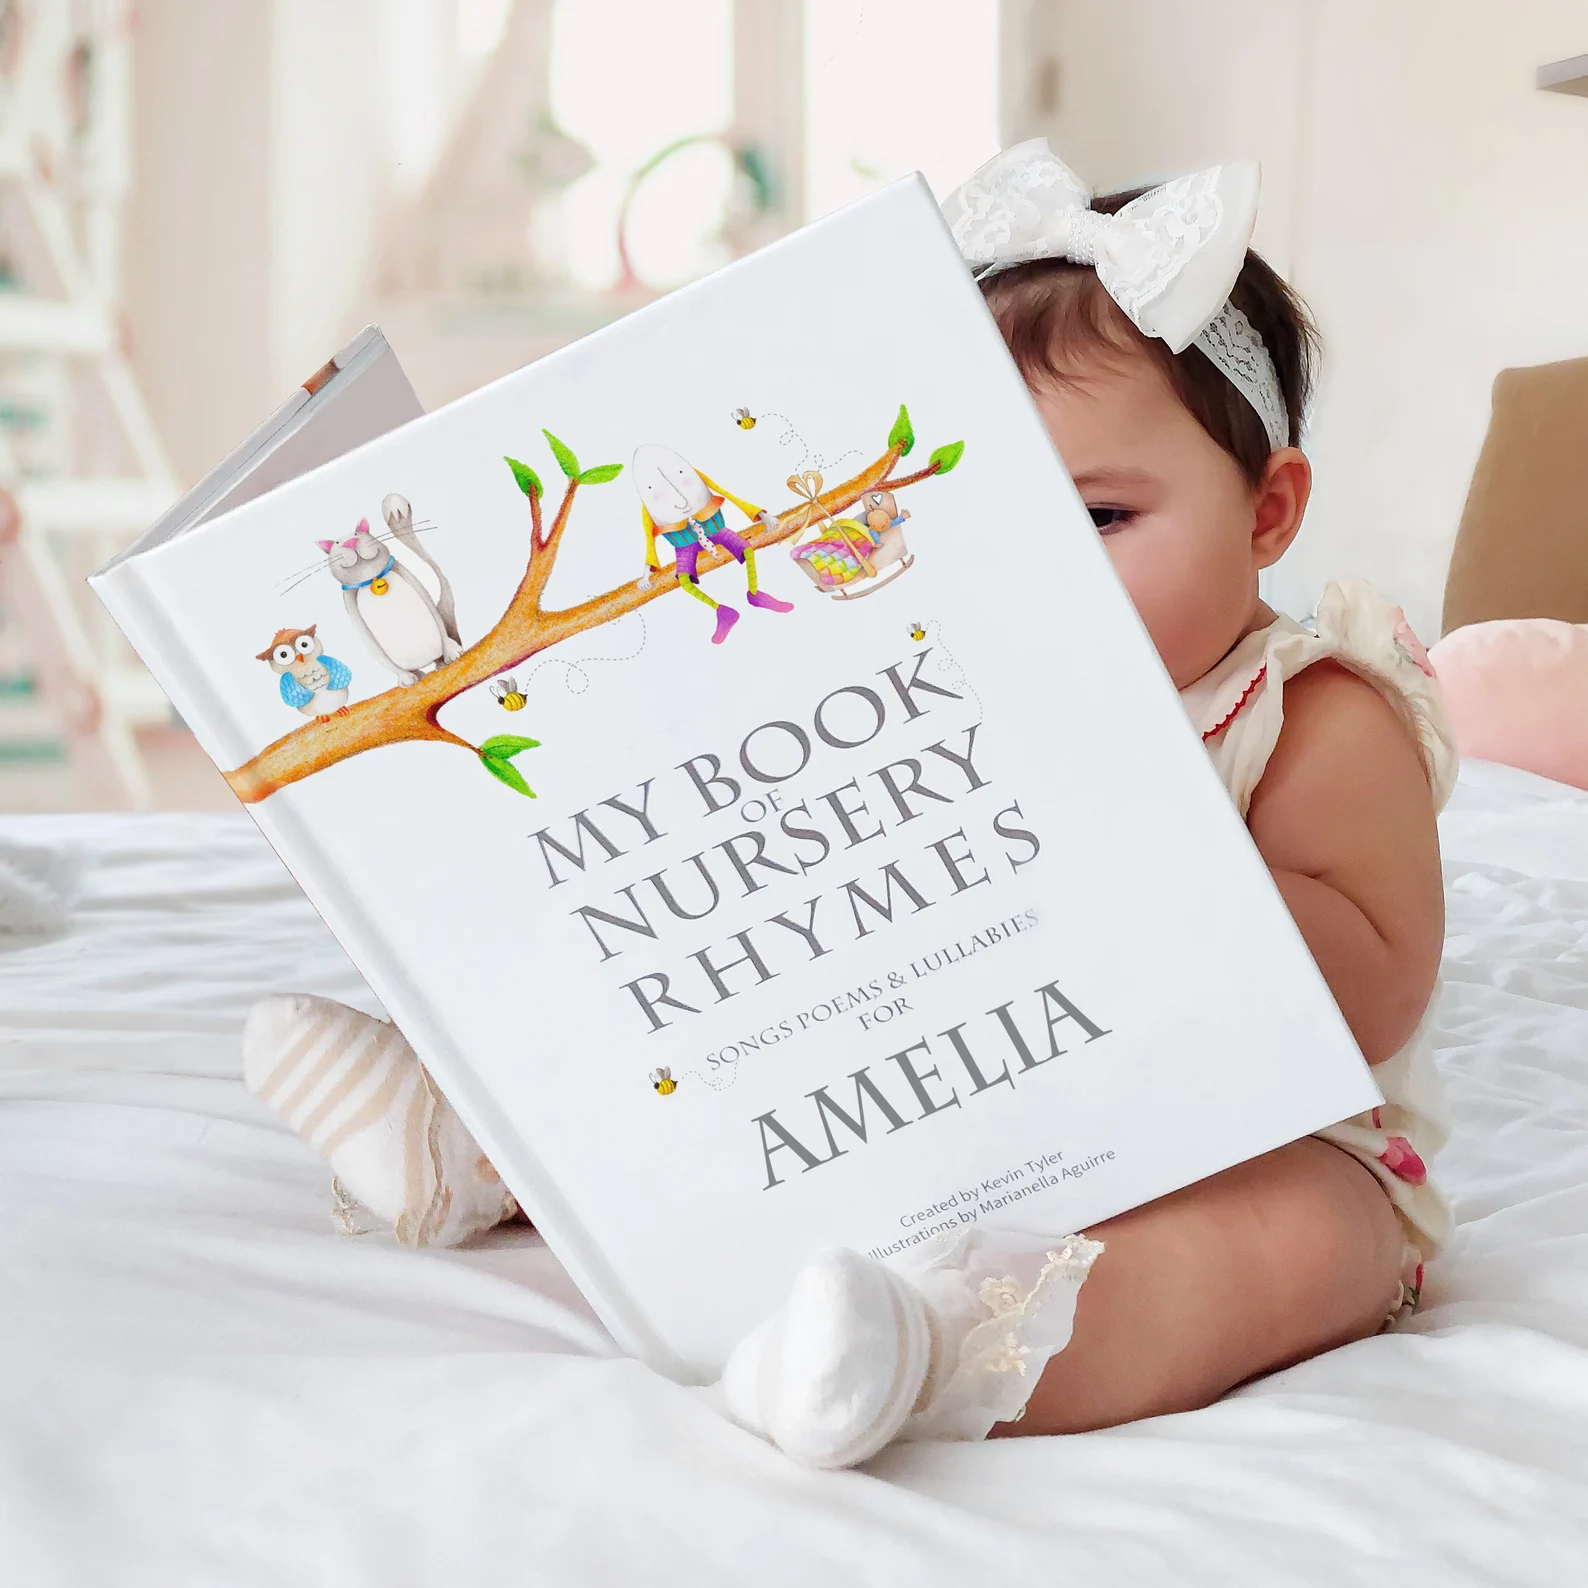 Baby reading personalized book 